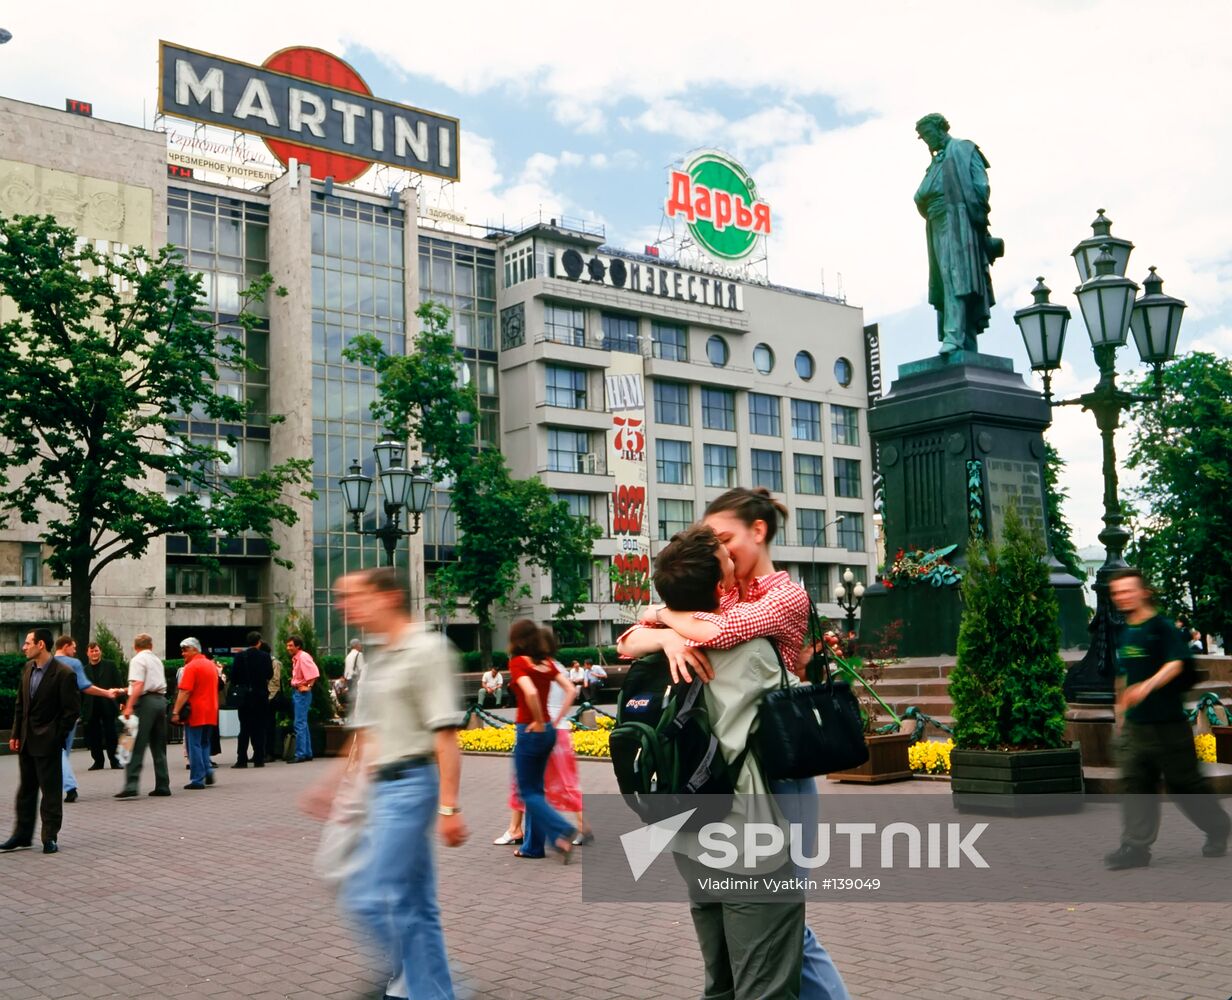 MOSCOW PUSHKIN SQUARE DATE